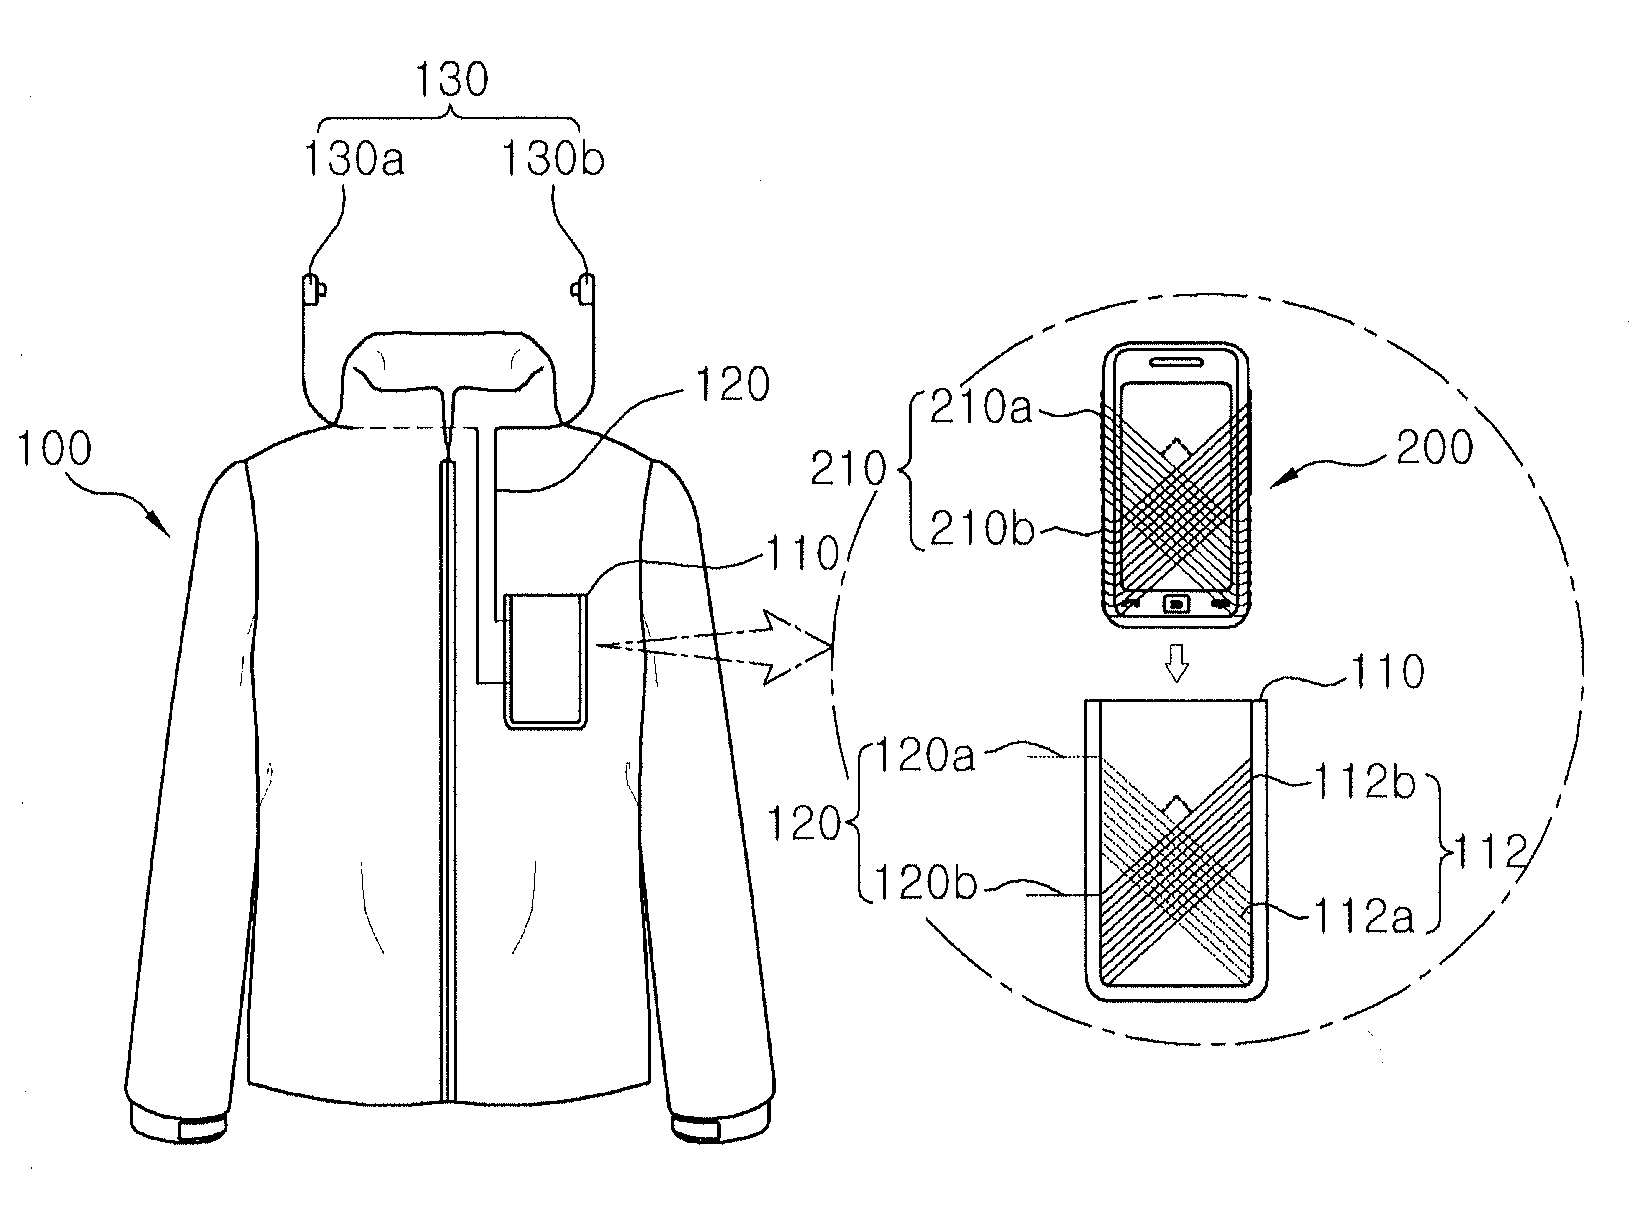 Textile-based magnetic field interface clothes and mobile terminal in wearable computing system